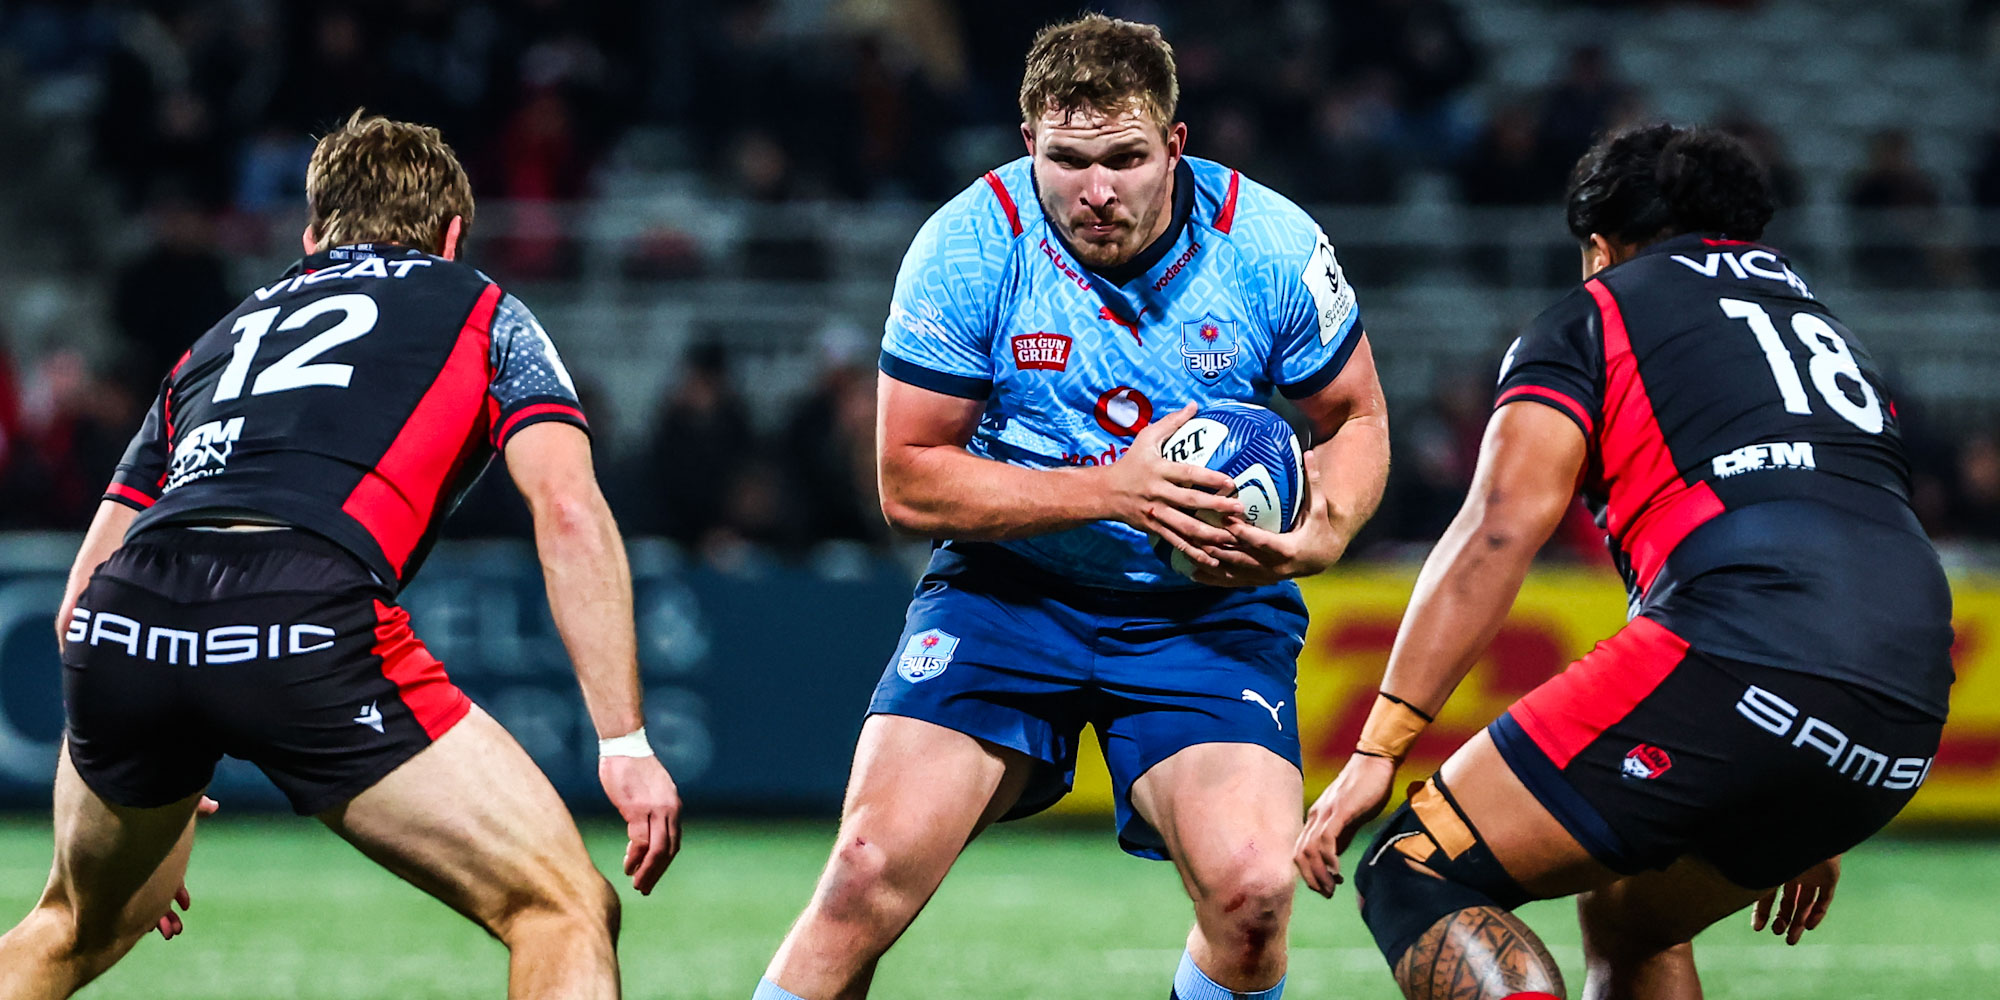 Two players from Lyon look to stop the Vodacom Bulls' Jan-Hendrik Wessels.